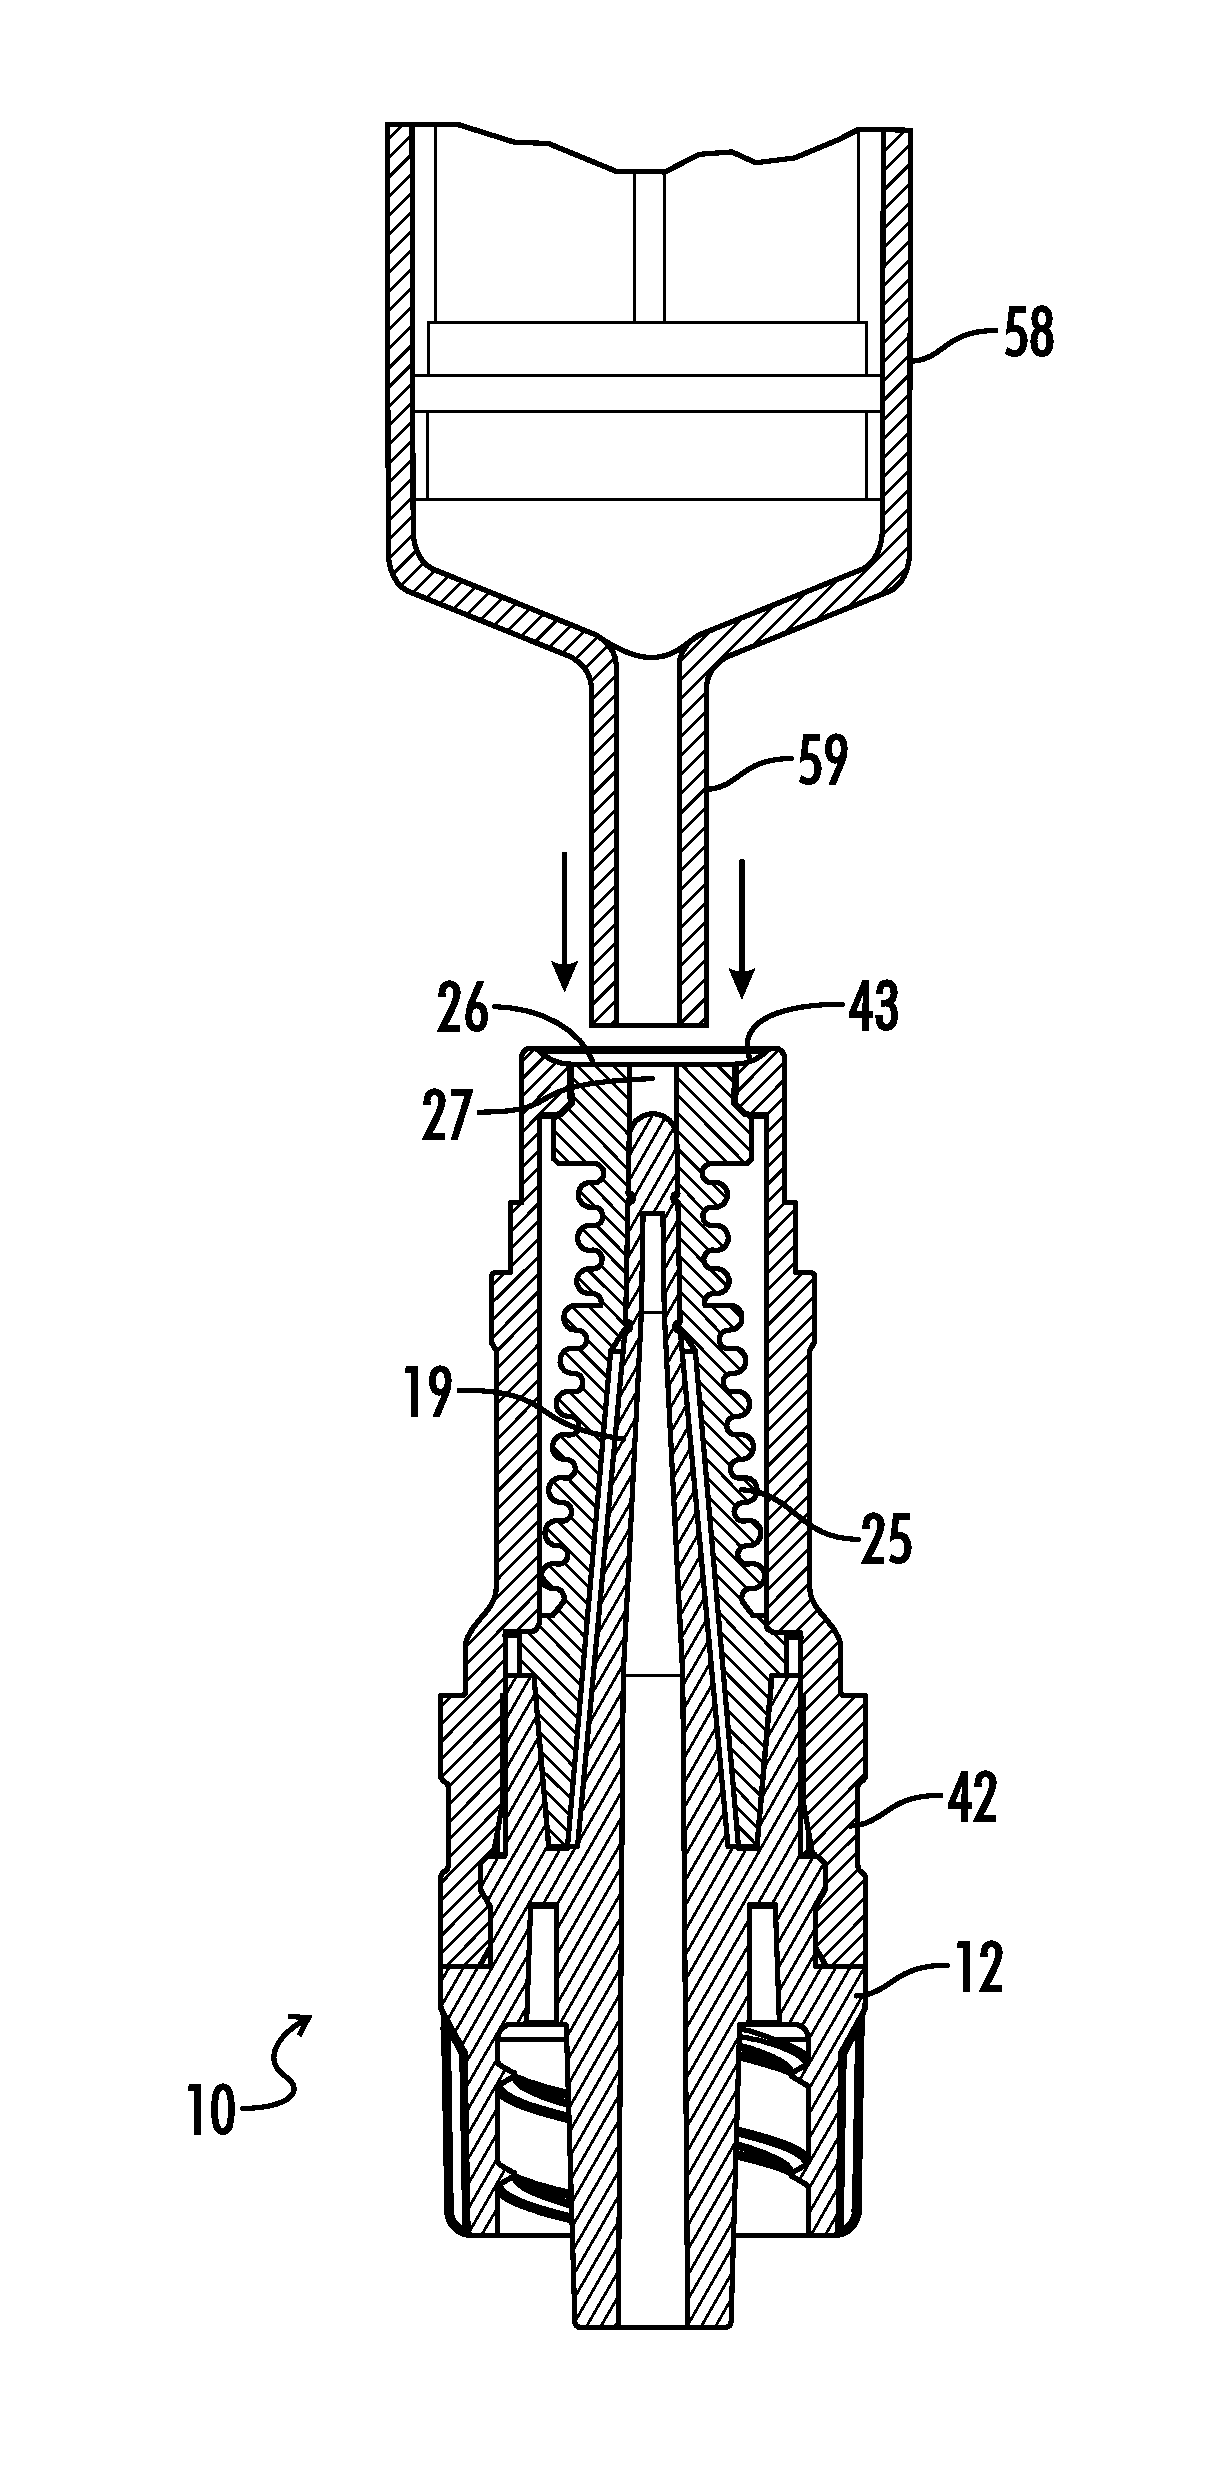 Needleless, Intermittent, Neutral Displacement IV Injection Port